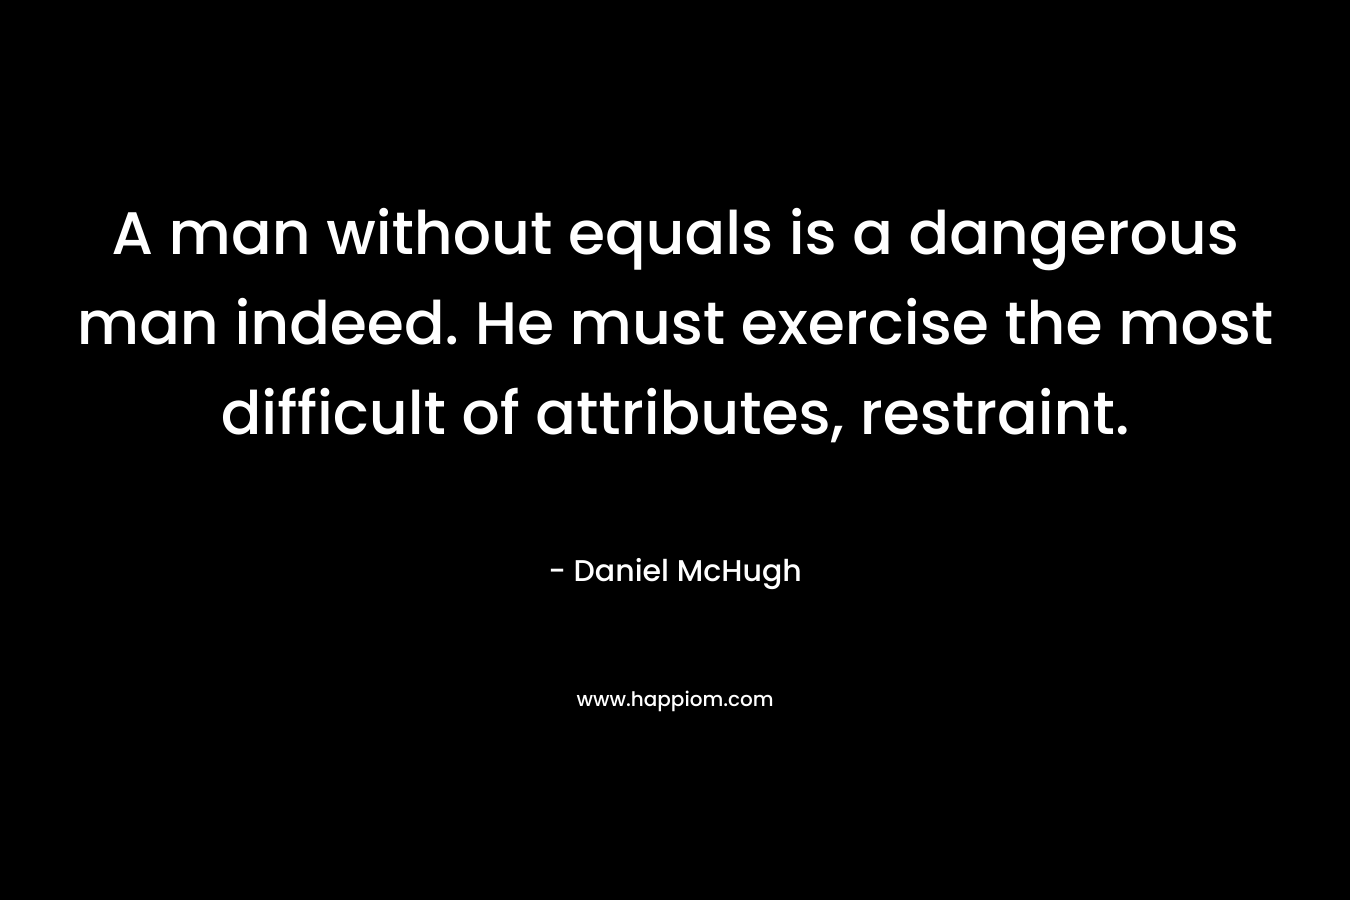 A man without equals is a dangerous man indeed. He must exercise the most difficult of attributes, restraint. – Daniel McHugh